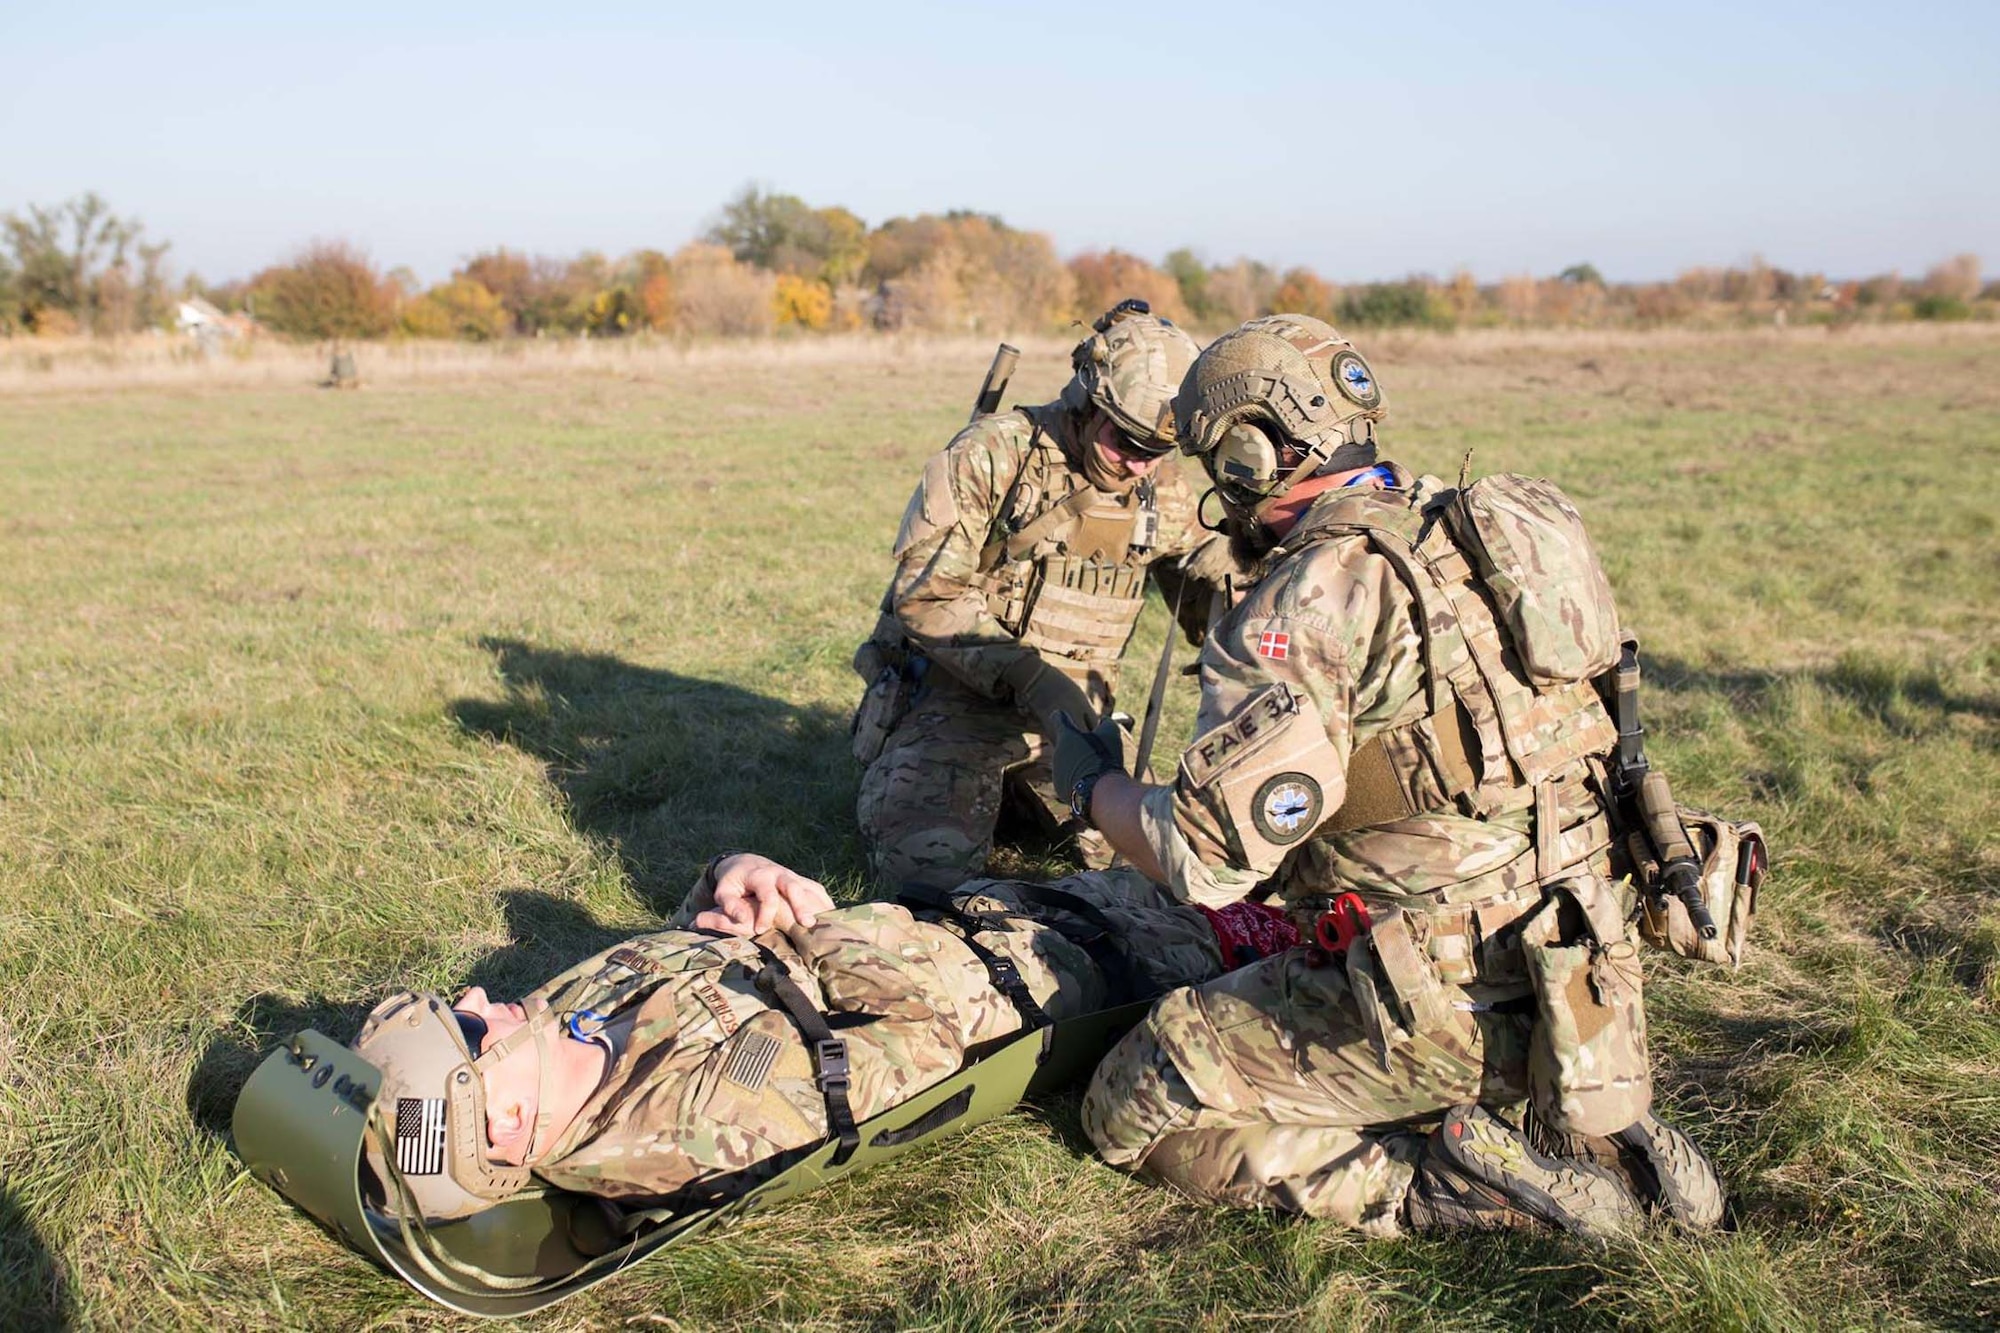 Danish pararescuemen secure Staff Sgt. Mikhail Scheglov, a finance technician with the 141st Comptroller Flight, to a stretcher during a training exercise during Clear Sky 2018 Oct. 16, 2018 at Vinnytsia Air Base, Ukraine. Clear Sky was a multi-national exercise aimed to promote peace, security and interoperability between regional allies as well as NATO partners. The two-week exercise brought together nearly 1,000 military personnel from nine countries. (U.S. Air National Guard photo by Staff Sgt. Brian Jarvis)